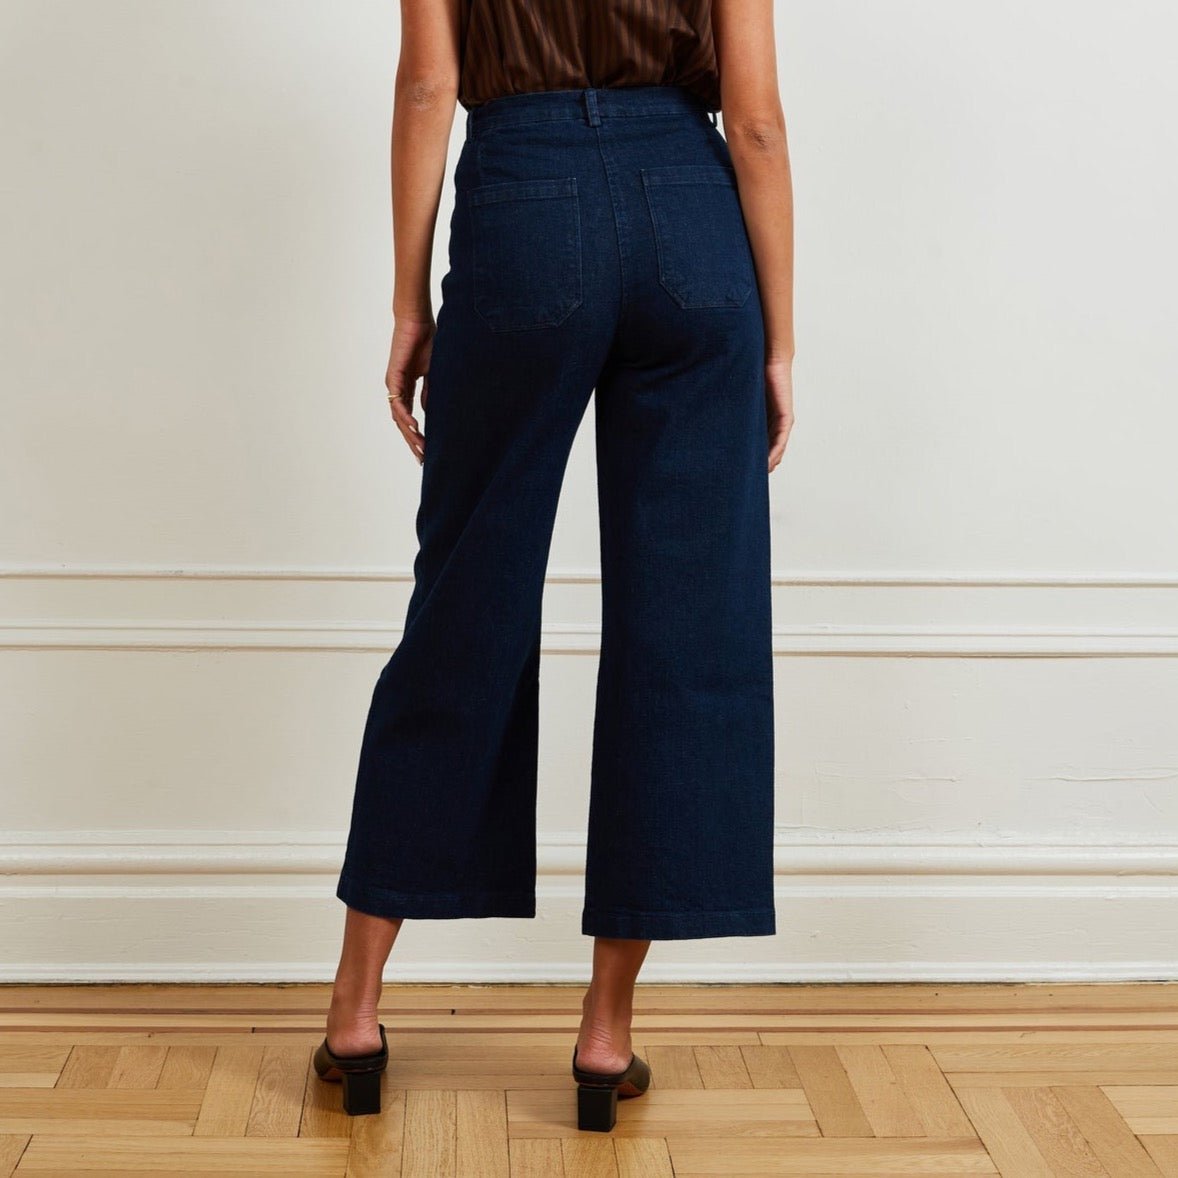 A model shows the backside of a high waisted wide leg cropped jean in a dark blue denim. The Simone Jean in Dark Indigo is designed by Loup and made in New York City, USA.